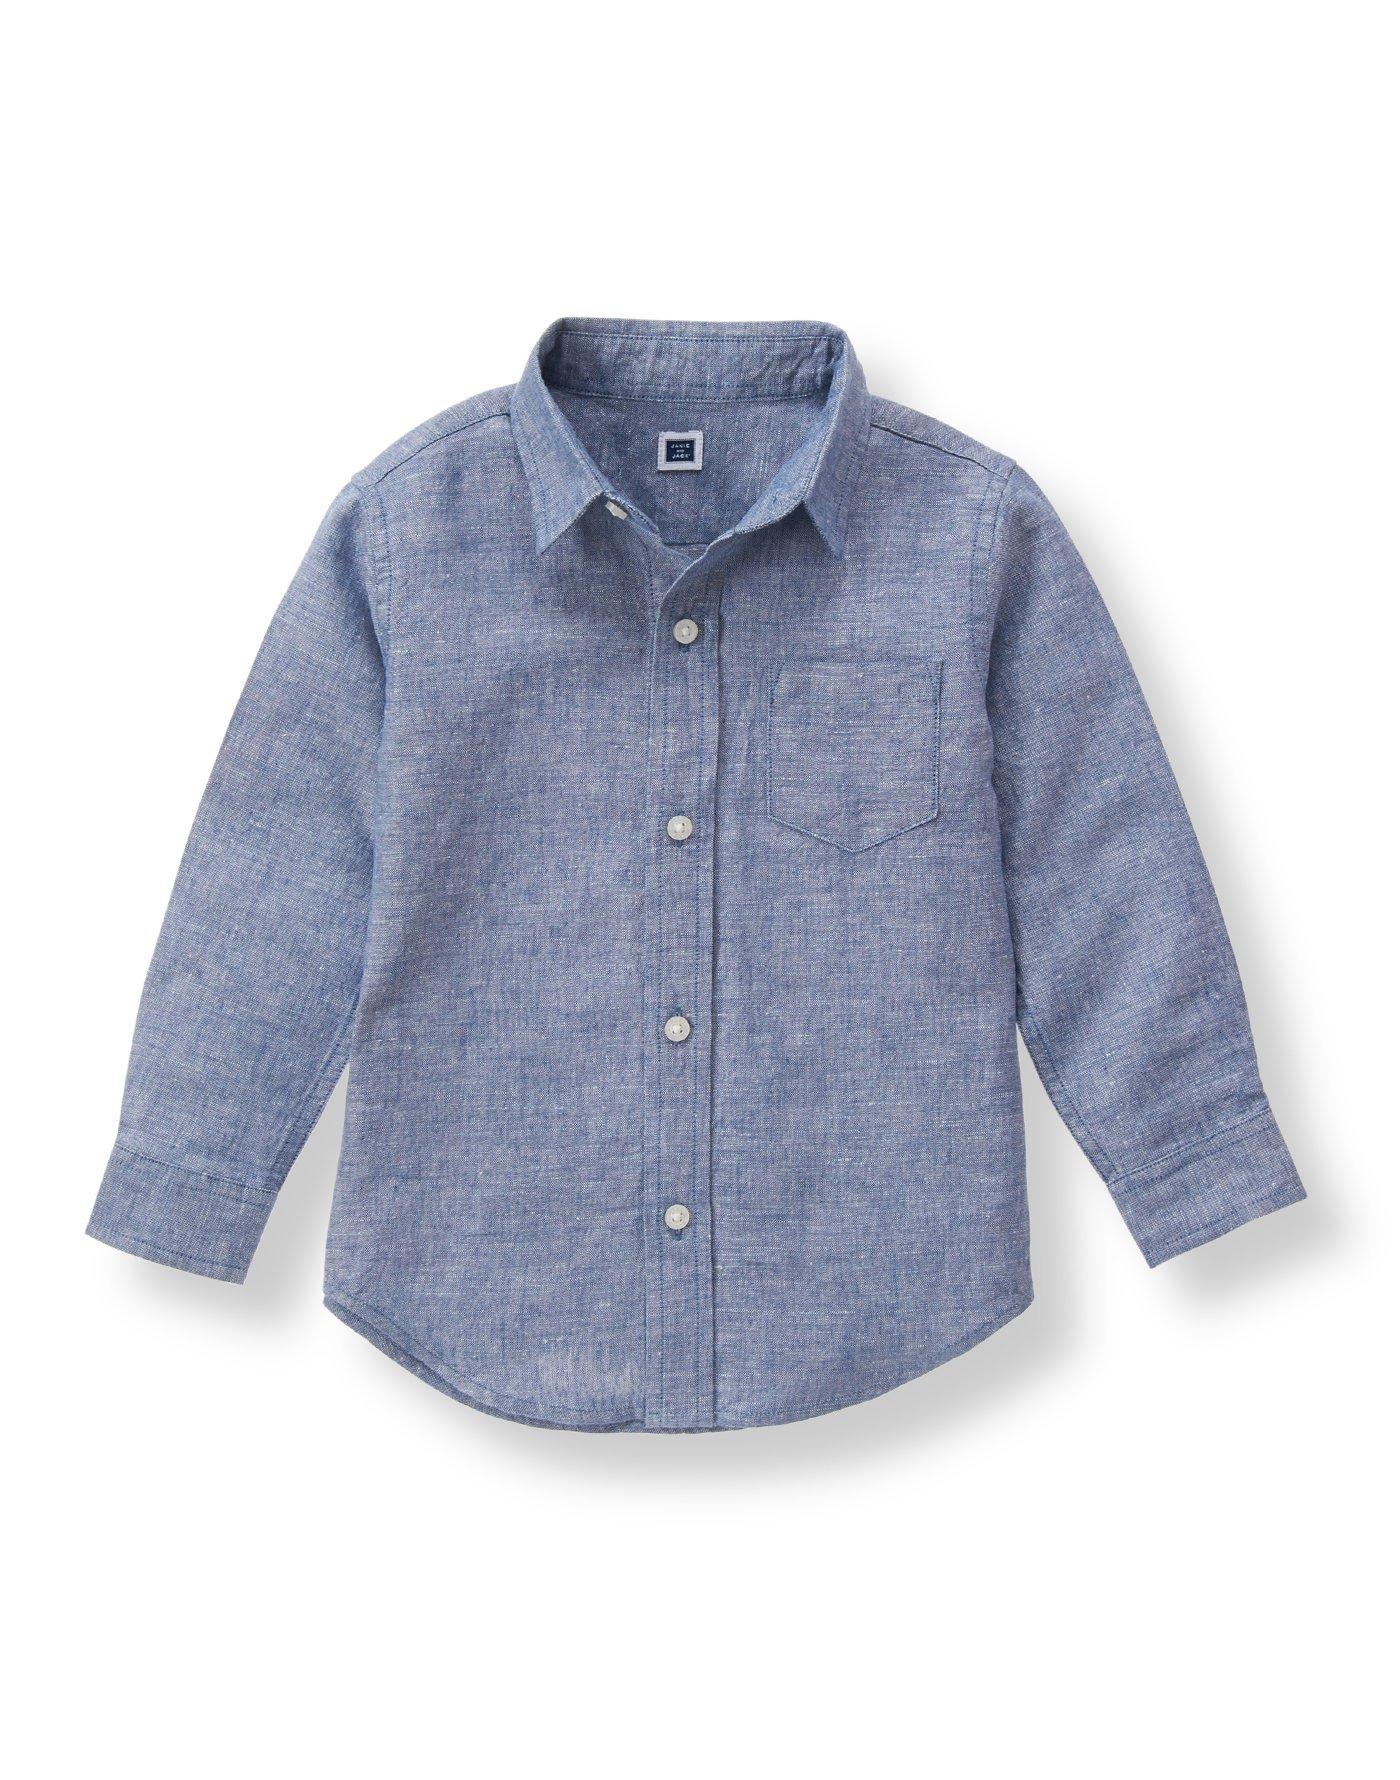 Boy Chambray Blue Linen Blend Shirt by Janie and Jack